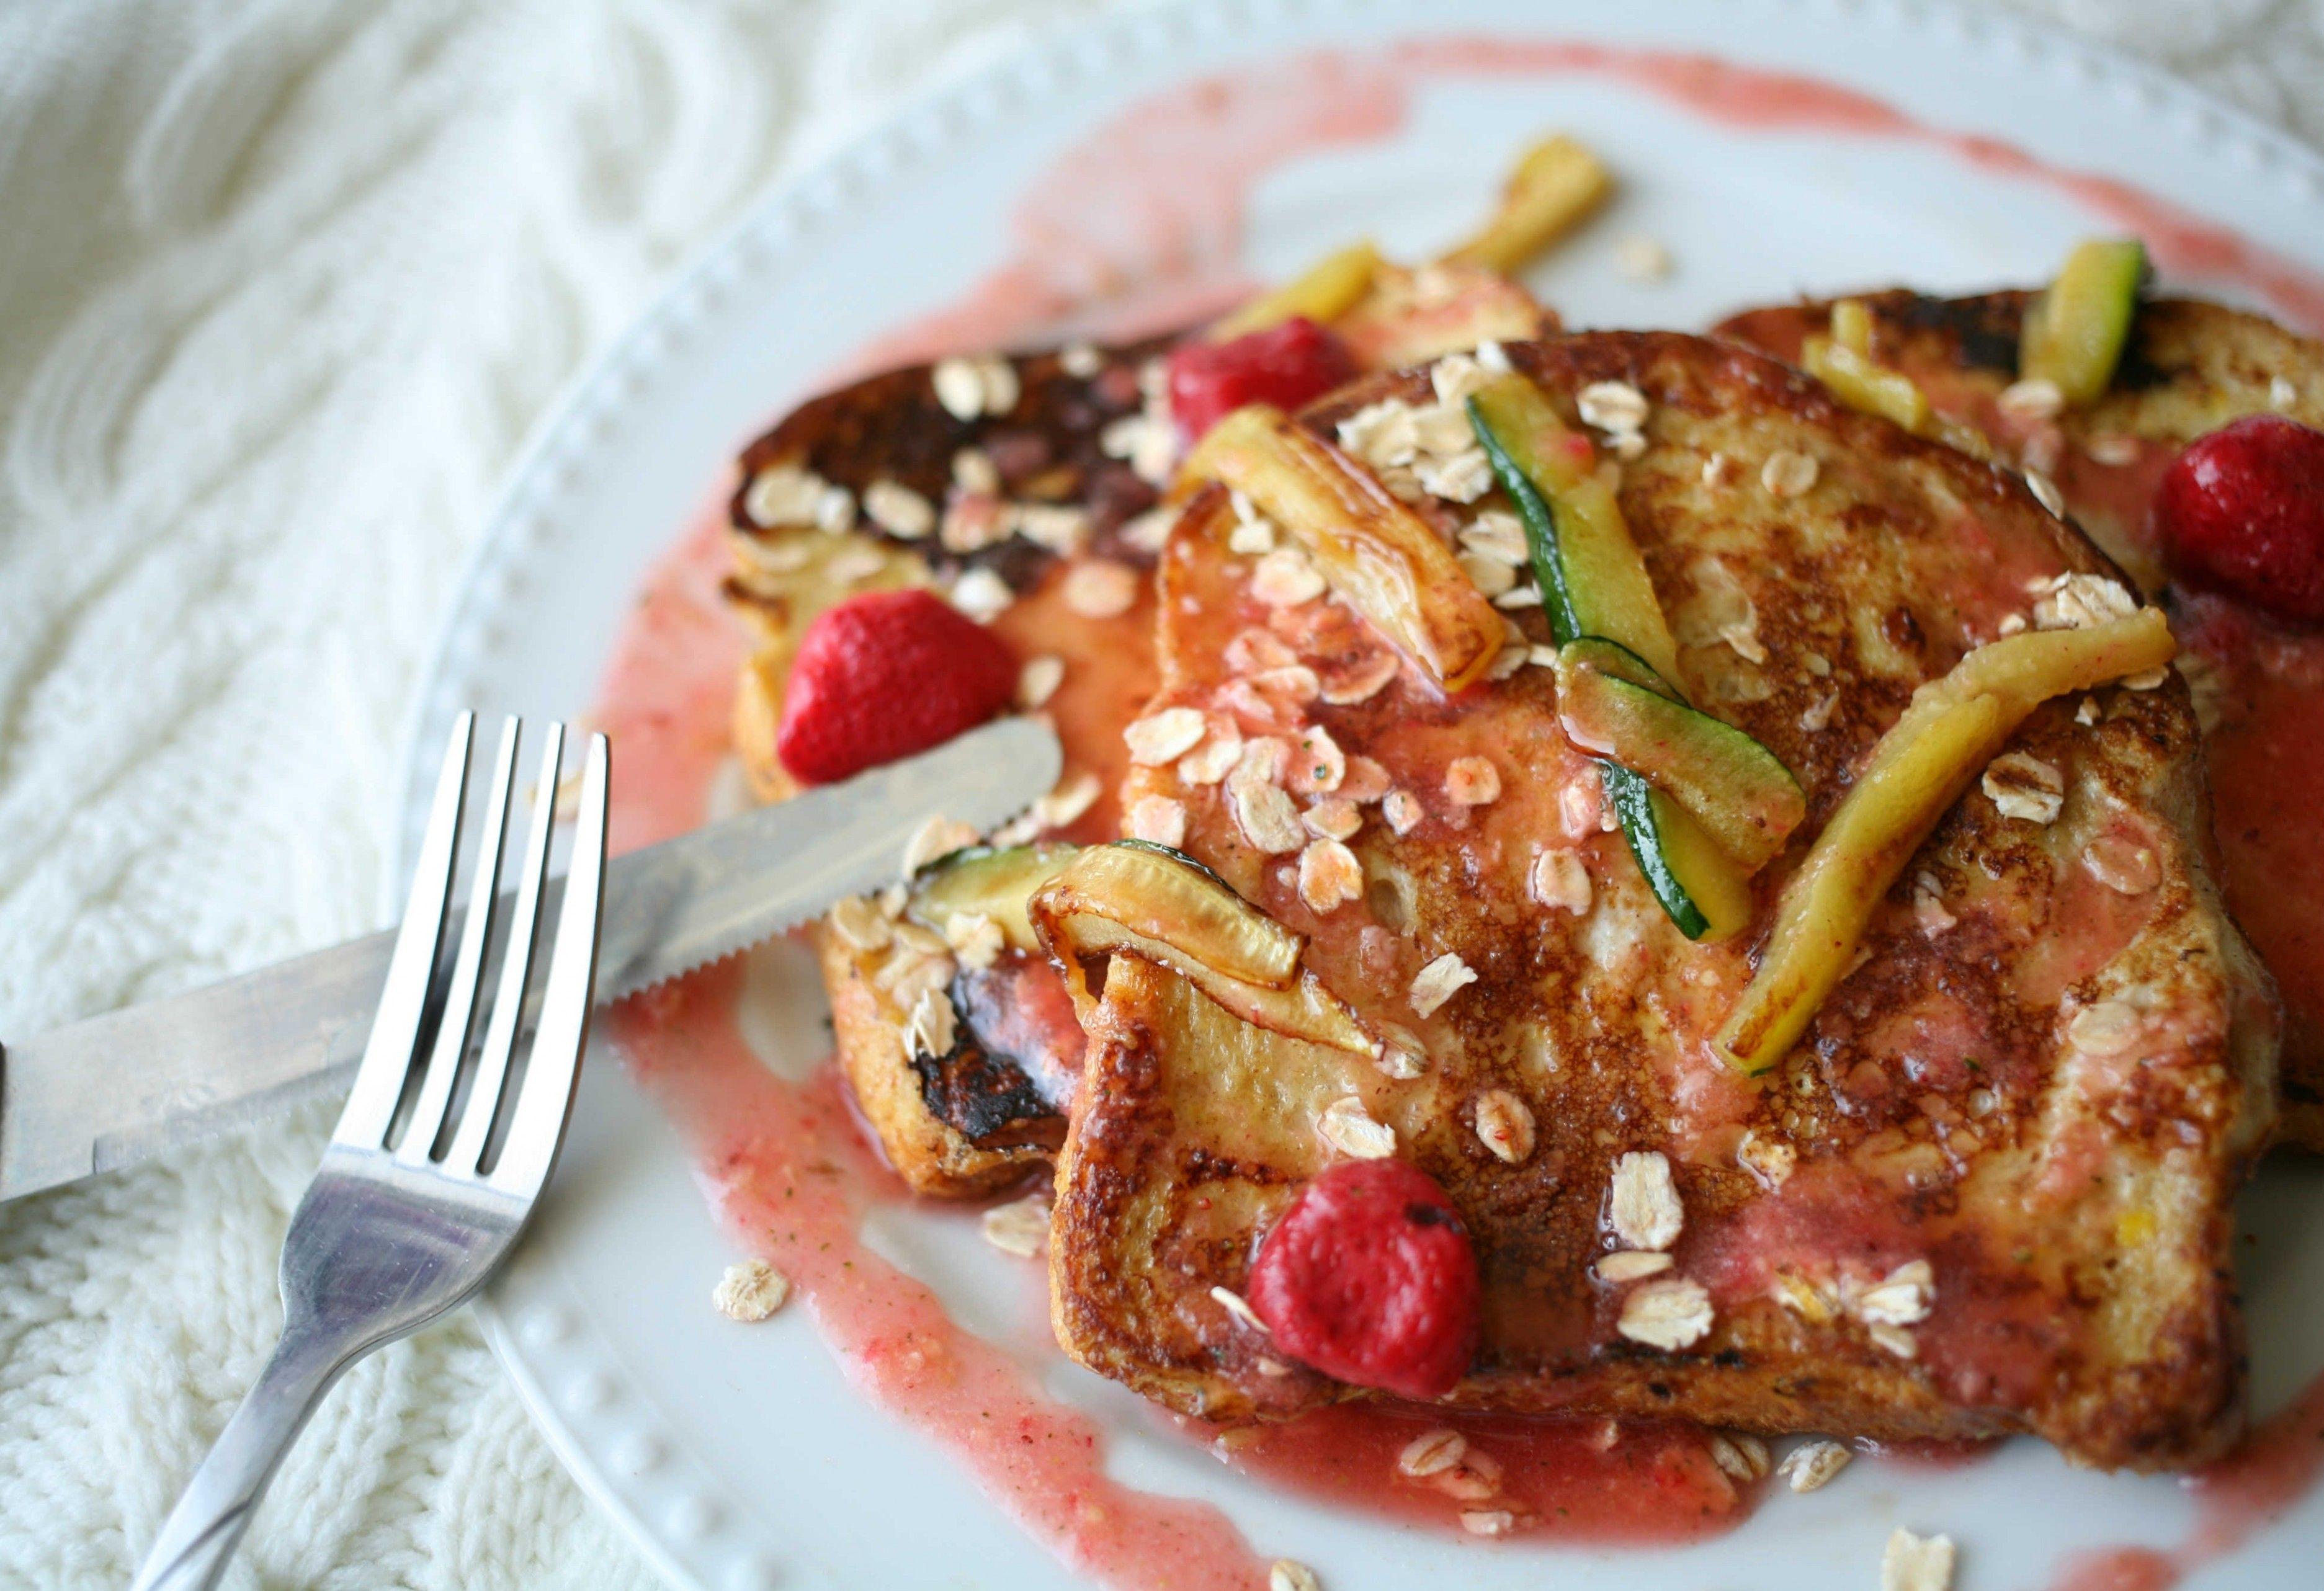 Download 3746x2565 Zucchini, French Toast, Vegetables, Sauce